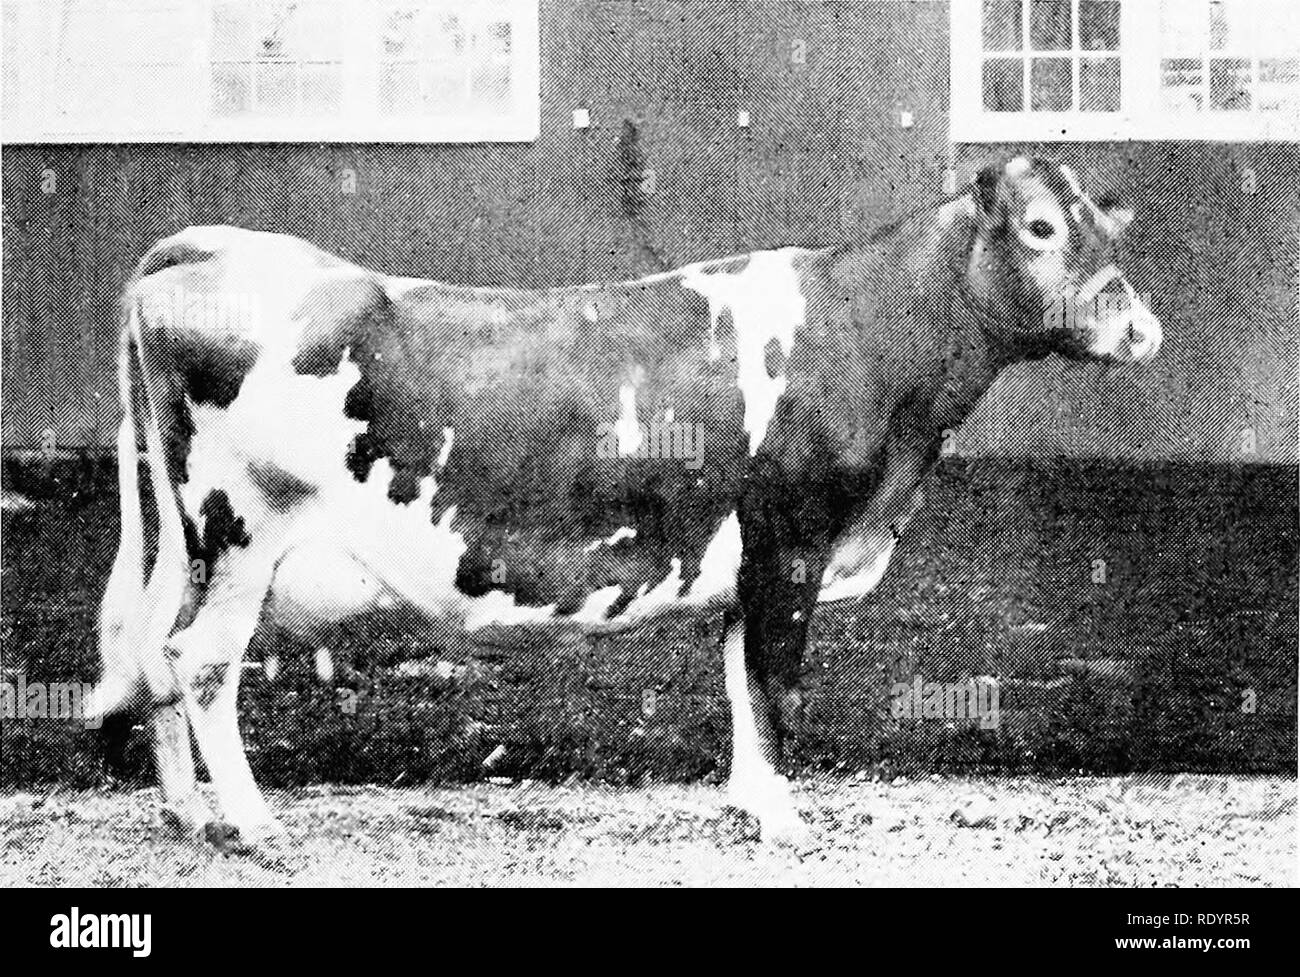 . The Guernsey breed. Guernsey cattle. The Guernsey Breed 345 t'rease of Haddon 28923, A. R. 1427, C 407 43 Hyacinth of Haddon 27337, A. R. 2224, A '.'..... 464.49 ( ilenvood's Combination VIII 12550, A. R. sire of Caprice of Haddon 24332, A. R 1347, G 479.37 Caprice of Haddon 24332. A. R. 1347, A (reentry) .. 625 49 Echo of Wasteland 24447, A. R. 1479 G 271 75 Vega's Darling 24448, A. R. 1753, E 343^77 Queenie of Haddon 24494, A. R 2500, G 377.64 Winsome of Haddon 36966, A. R, 2649, (', ,, 314 00. 4*K^^^^'^fW'' Glenwood Girl 8th 10830, A. R. 5, B. Gubanola of Haddon 36128, A, R. 3155, G 404. Stock Photo